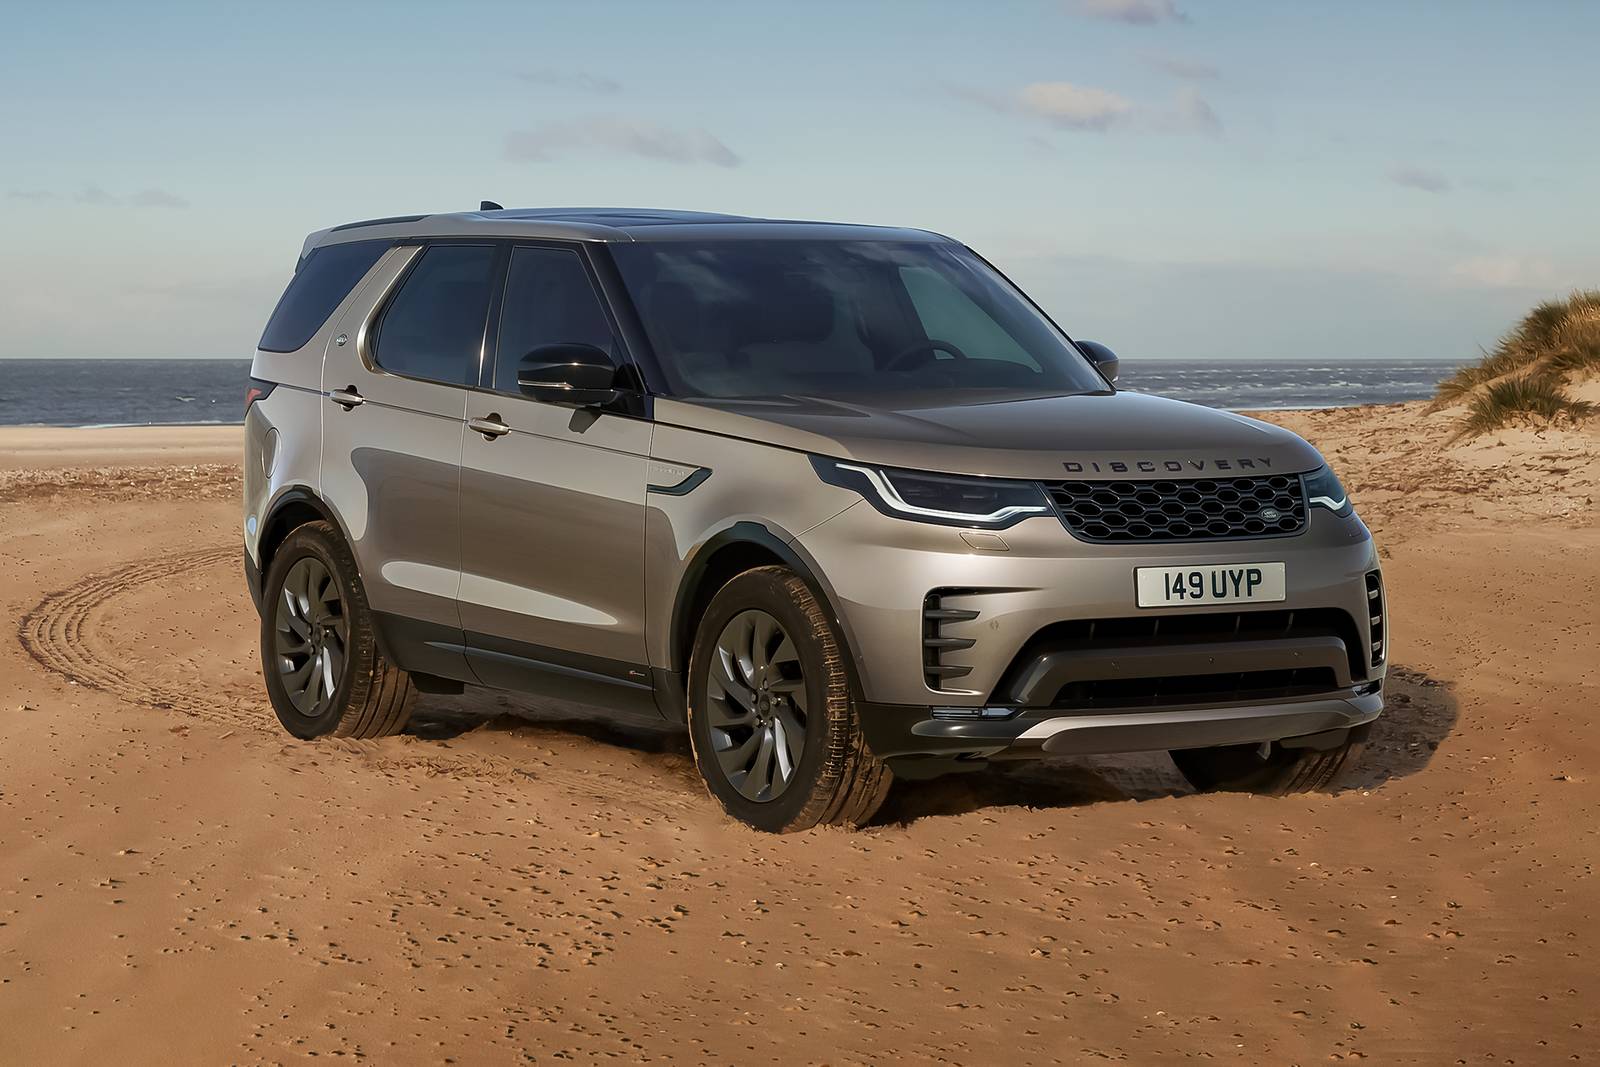 LAND ROVER DISCOVERY SE P300 ▶ Impuesto Vehicular ≫